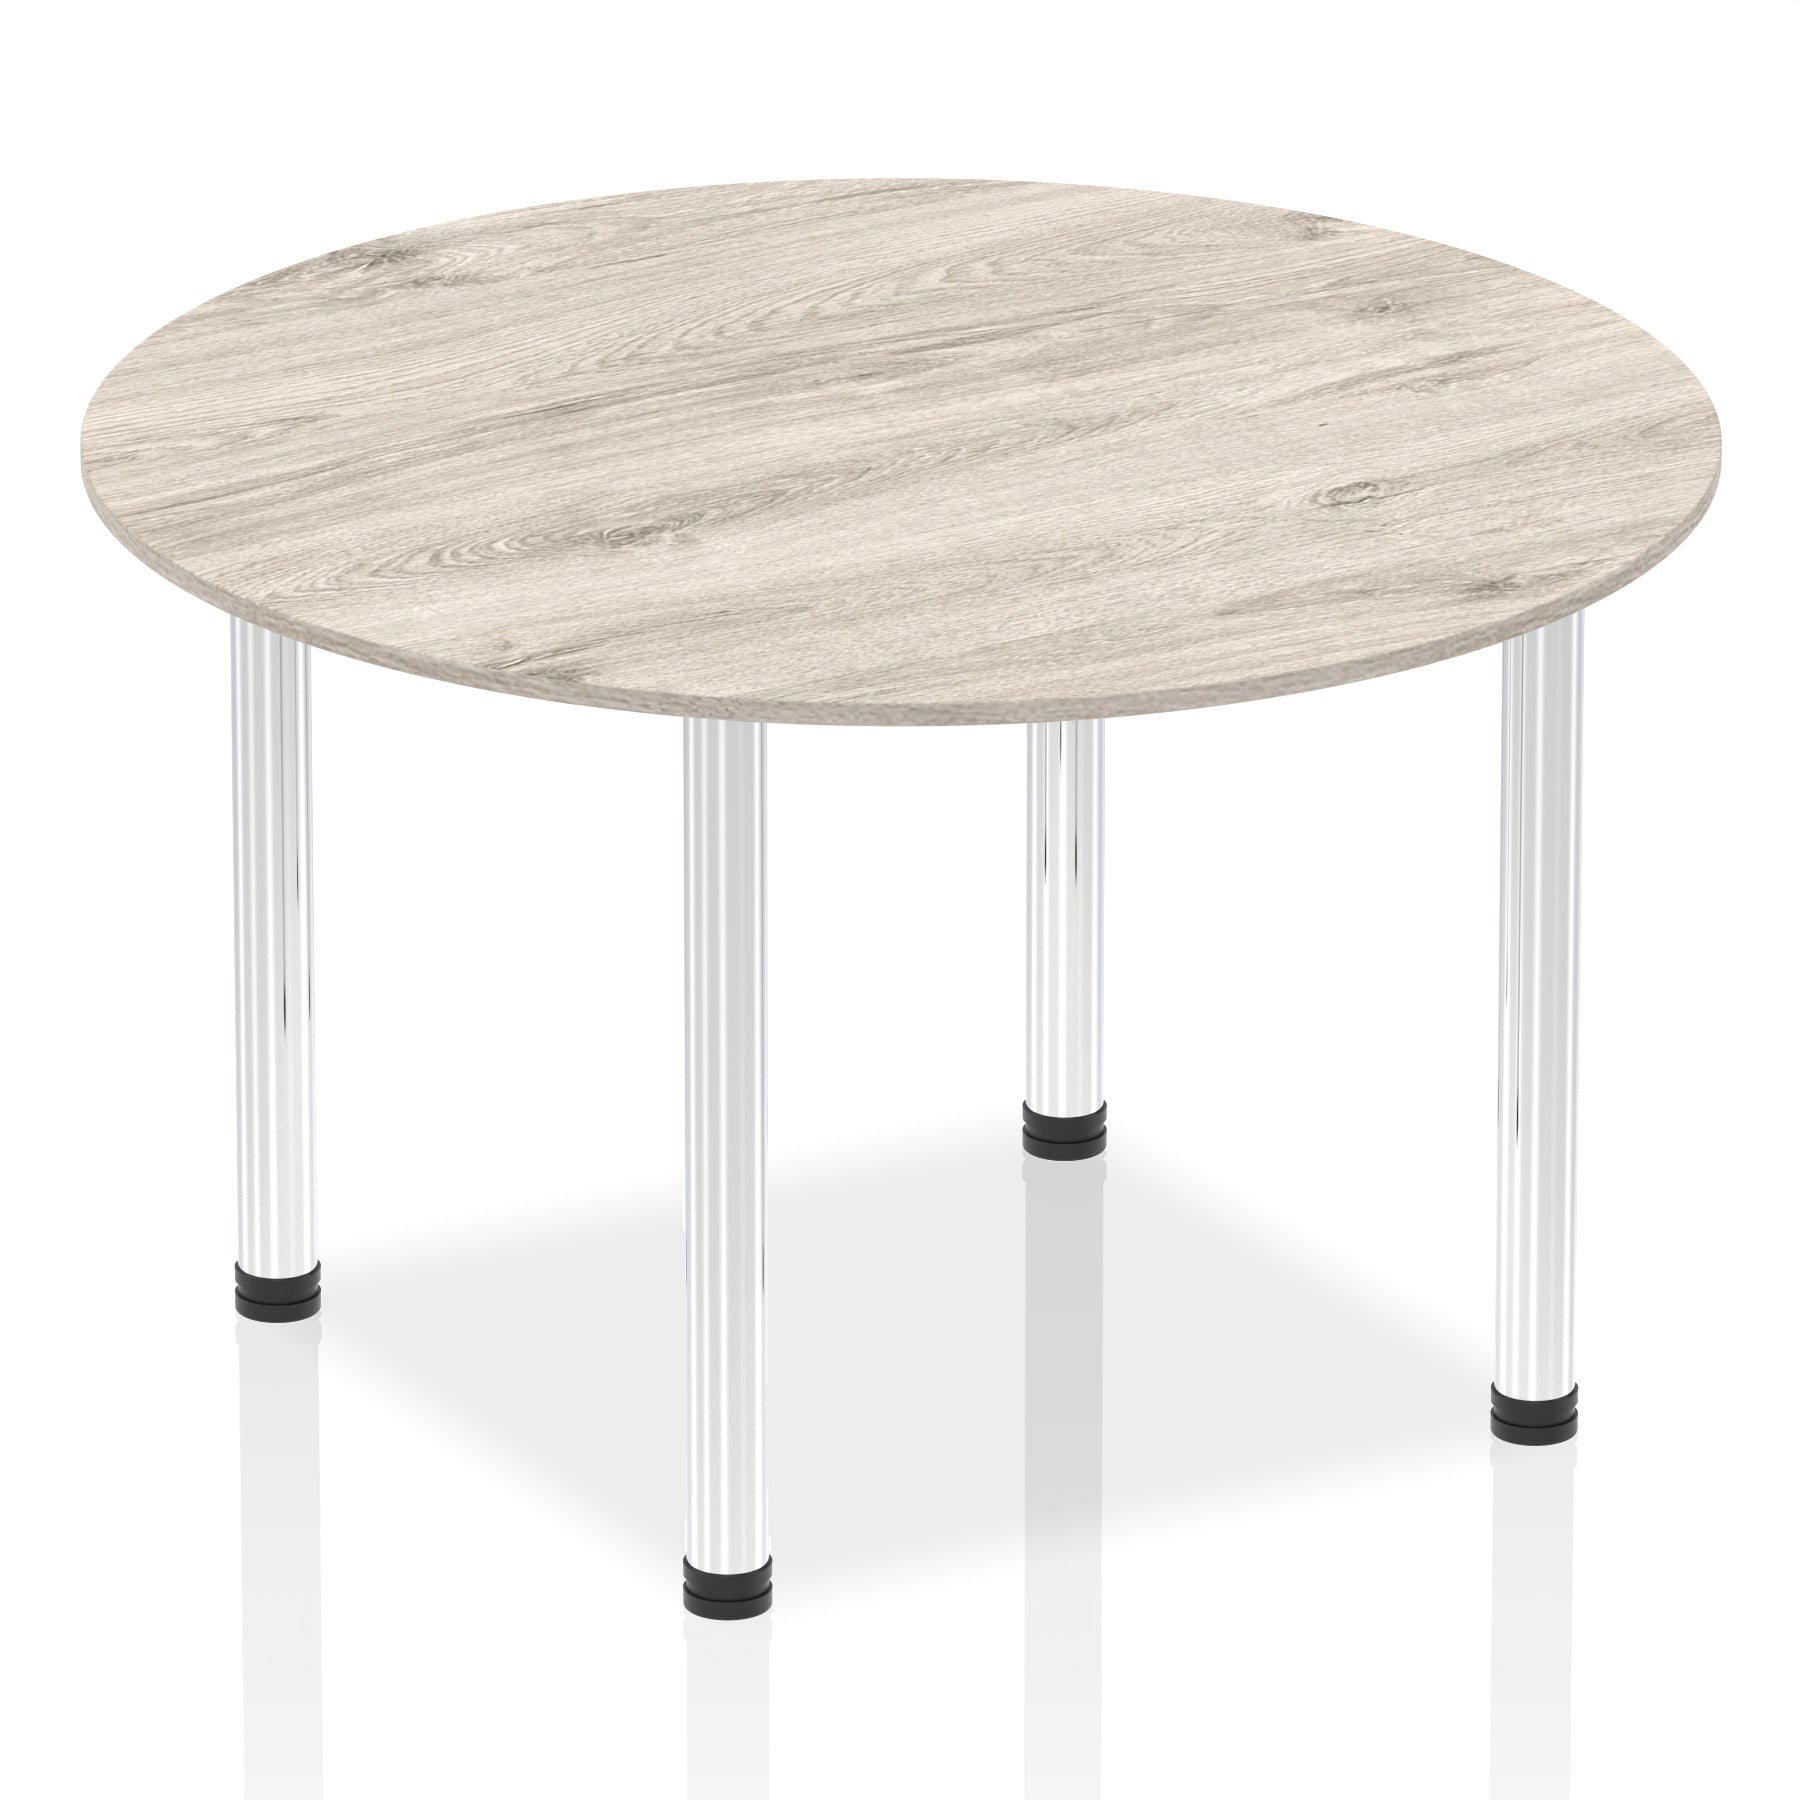 Zap Eko Round Table Top - 1200mm - Office Furniture Direct